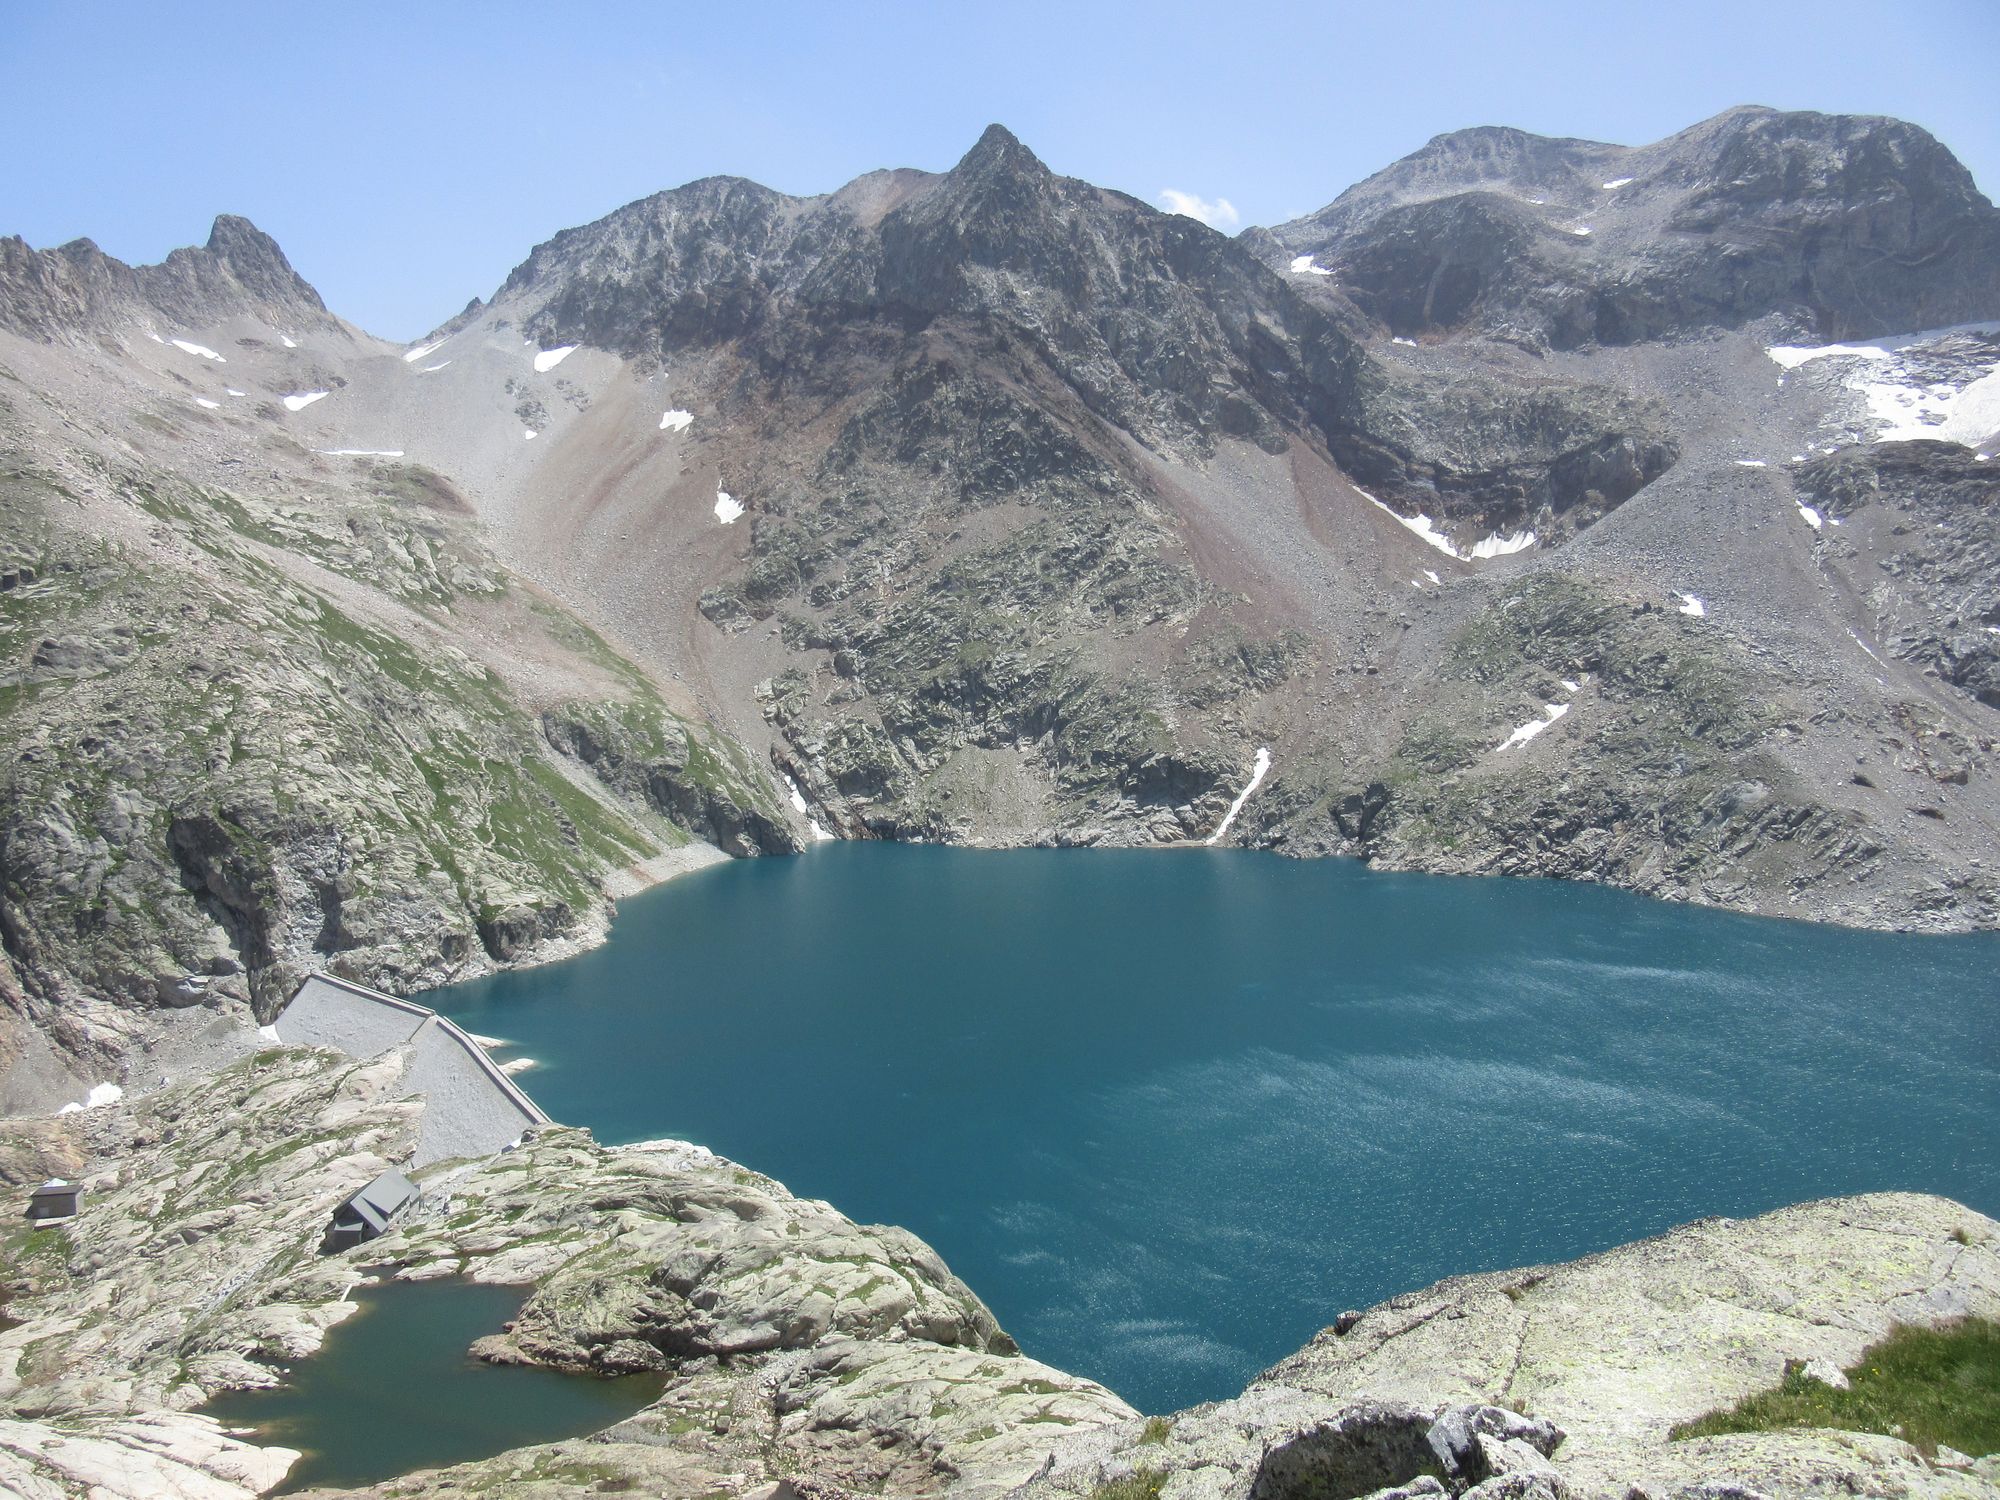 Looking back to Lac du Portillon from the climb up Tusse de Montarqué.